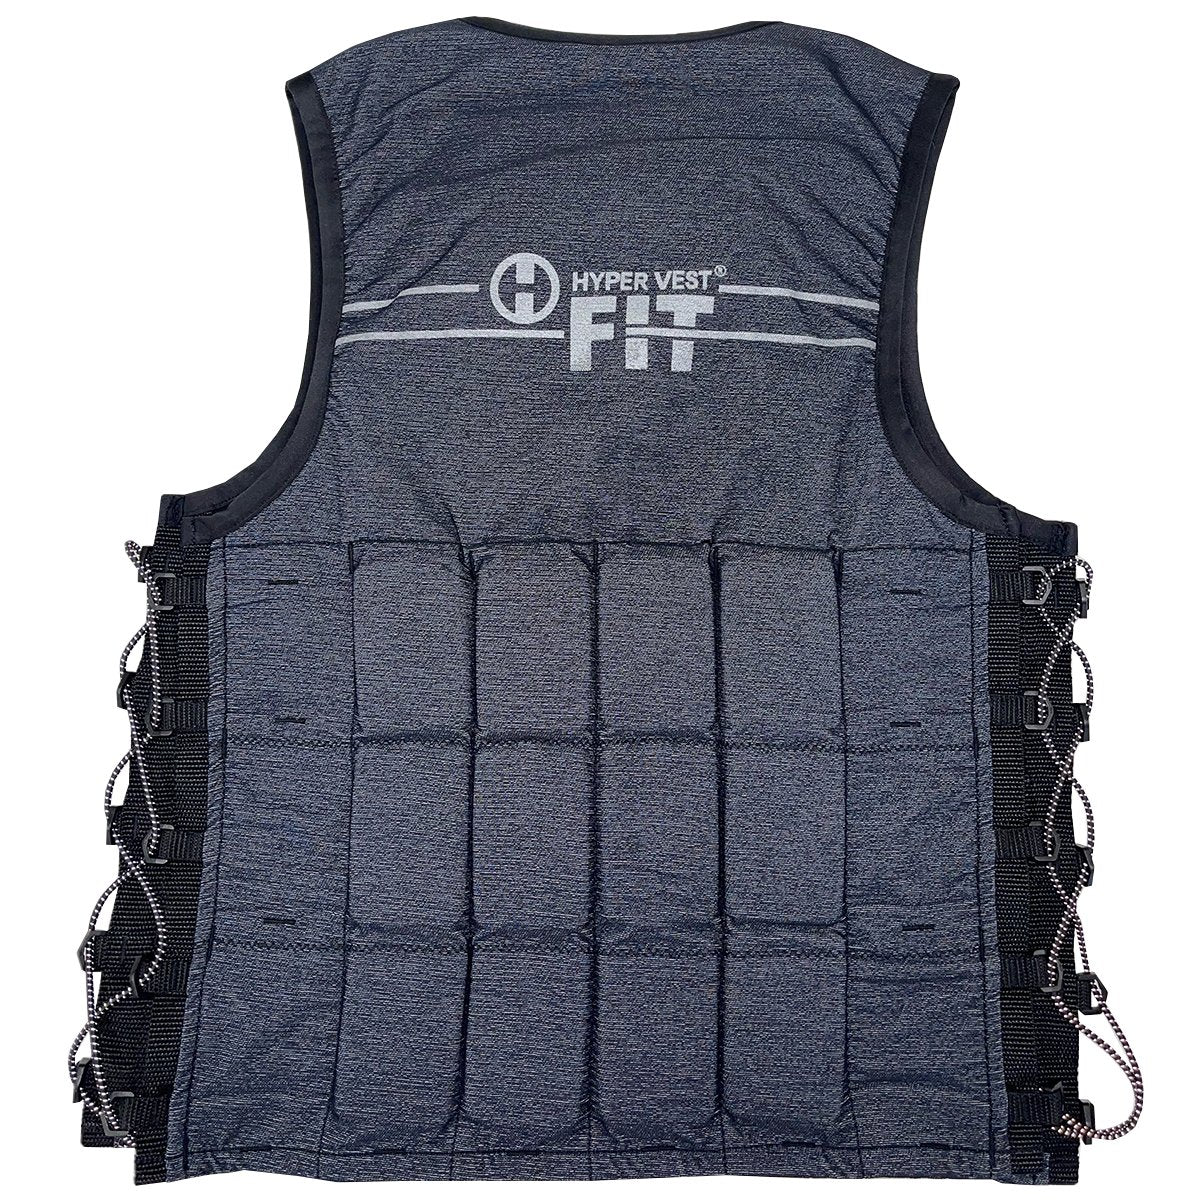 Weighted Vests: Benefits, Considerations, and Exercises to Try